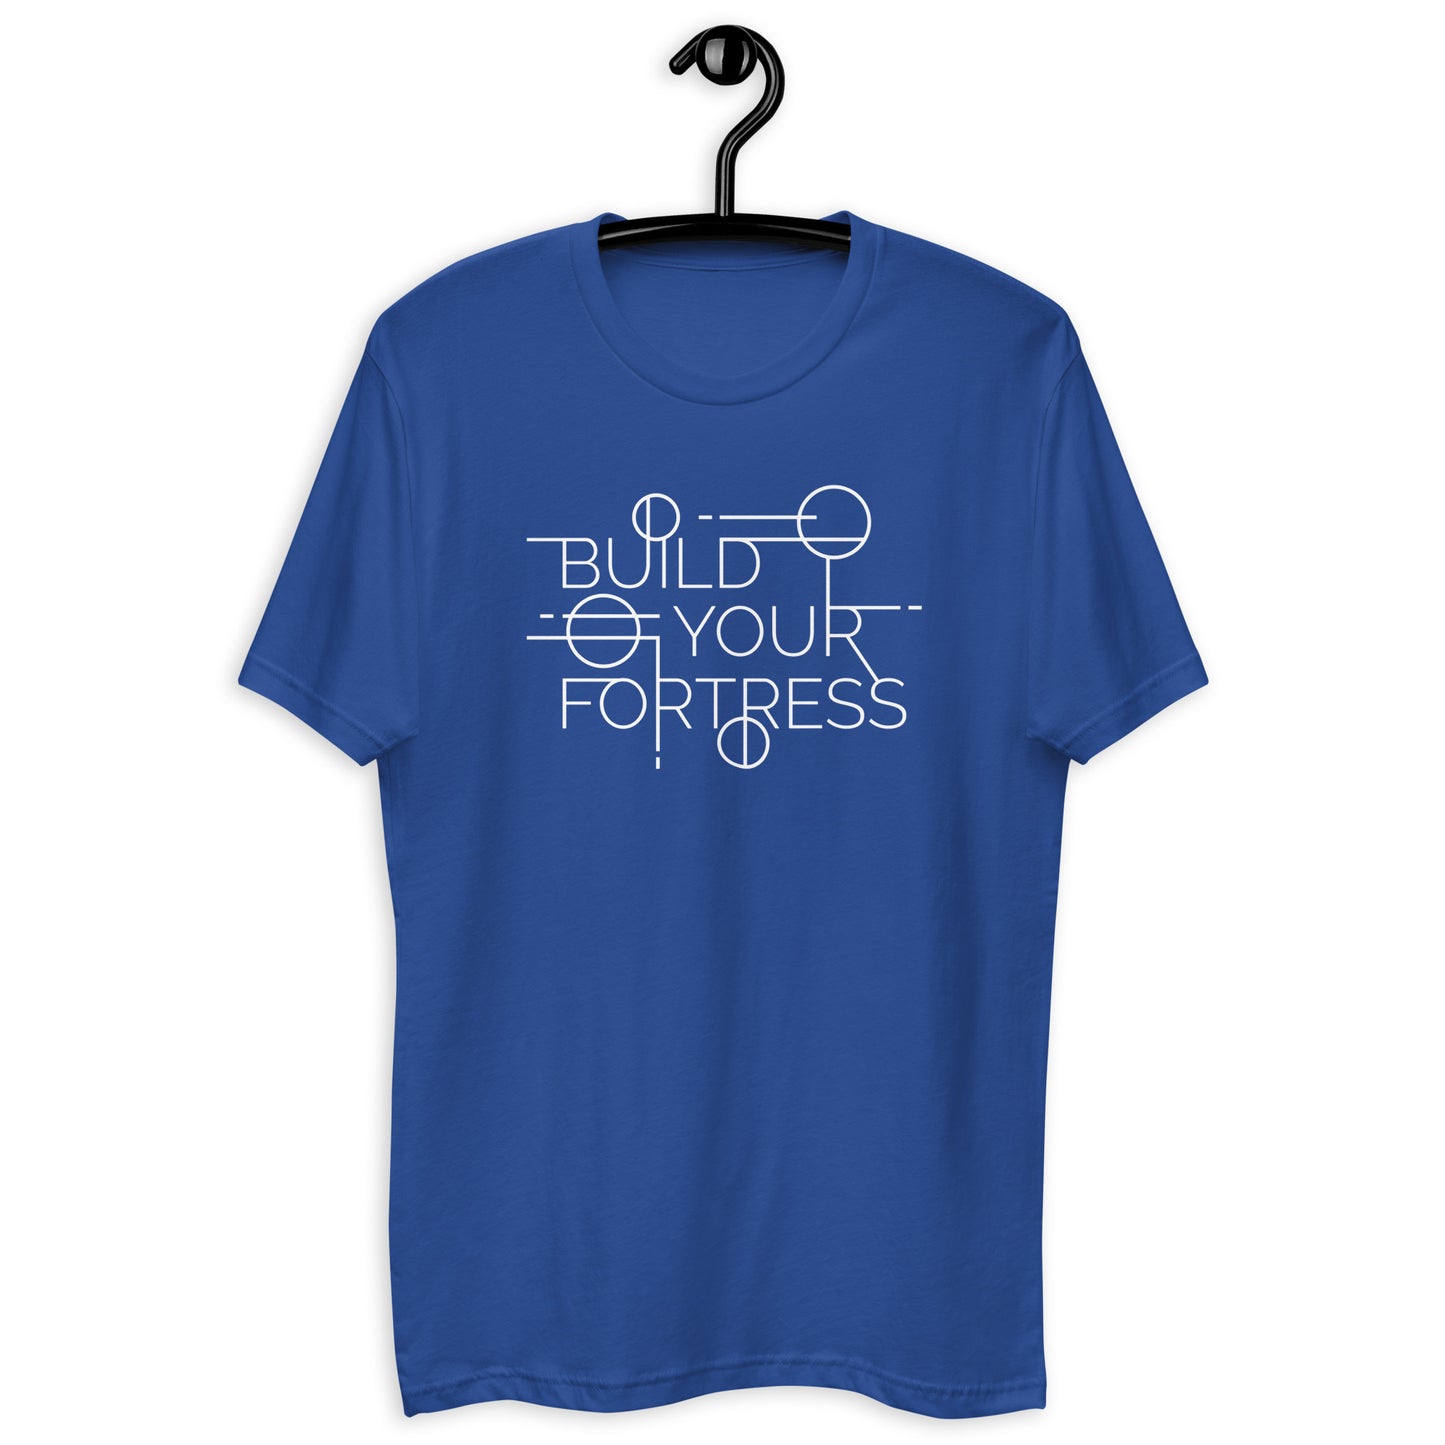 Build Your Fortress Short Sleeve T-shirt